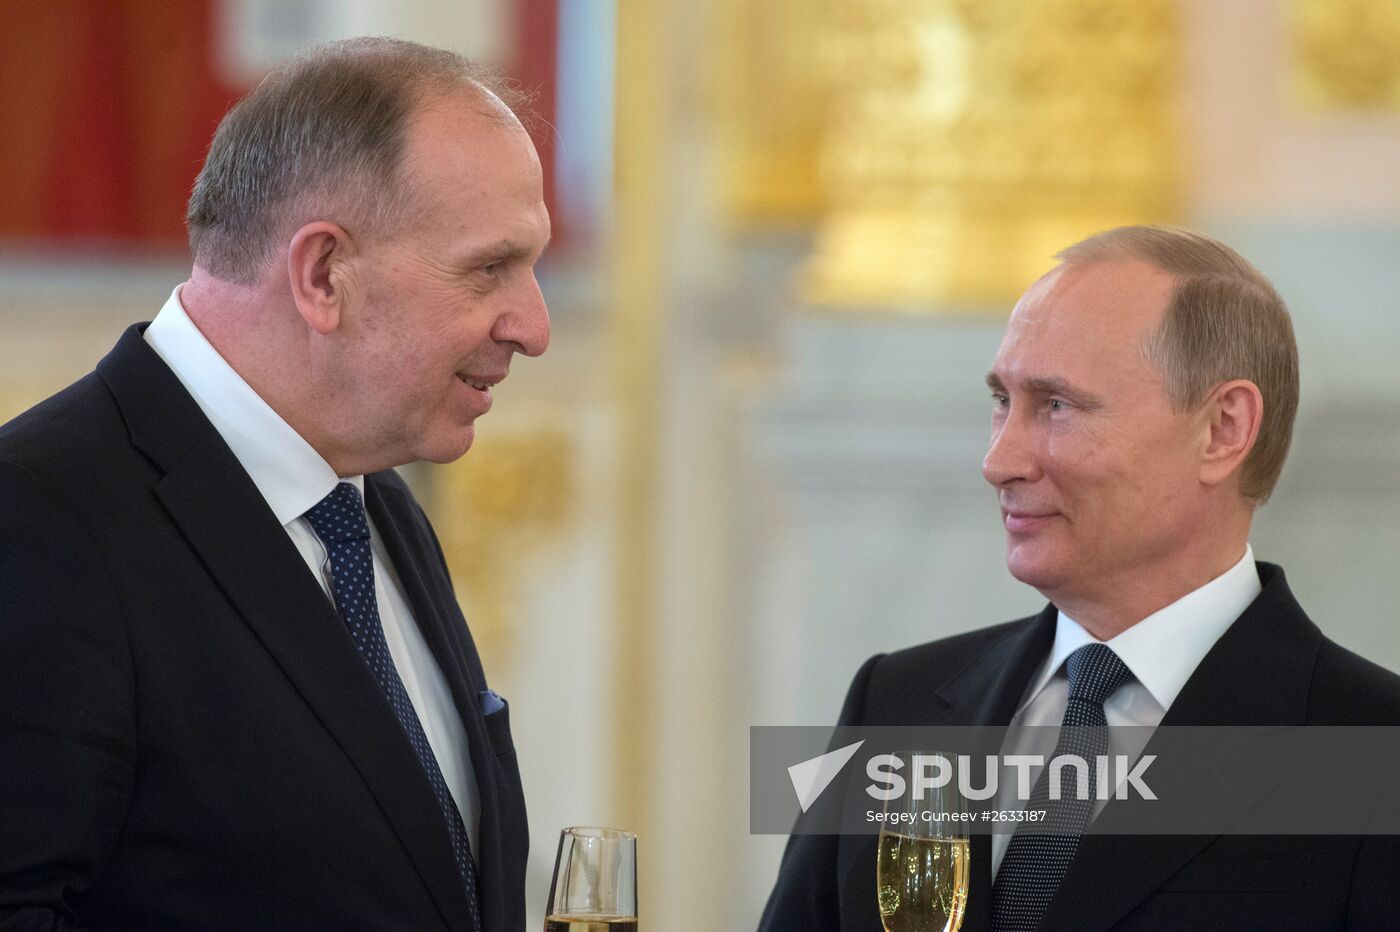 Presentation of credentials to Russian President Vladimir Putin by ambassadors of foreign states